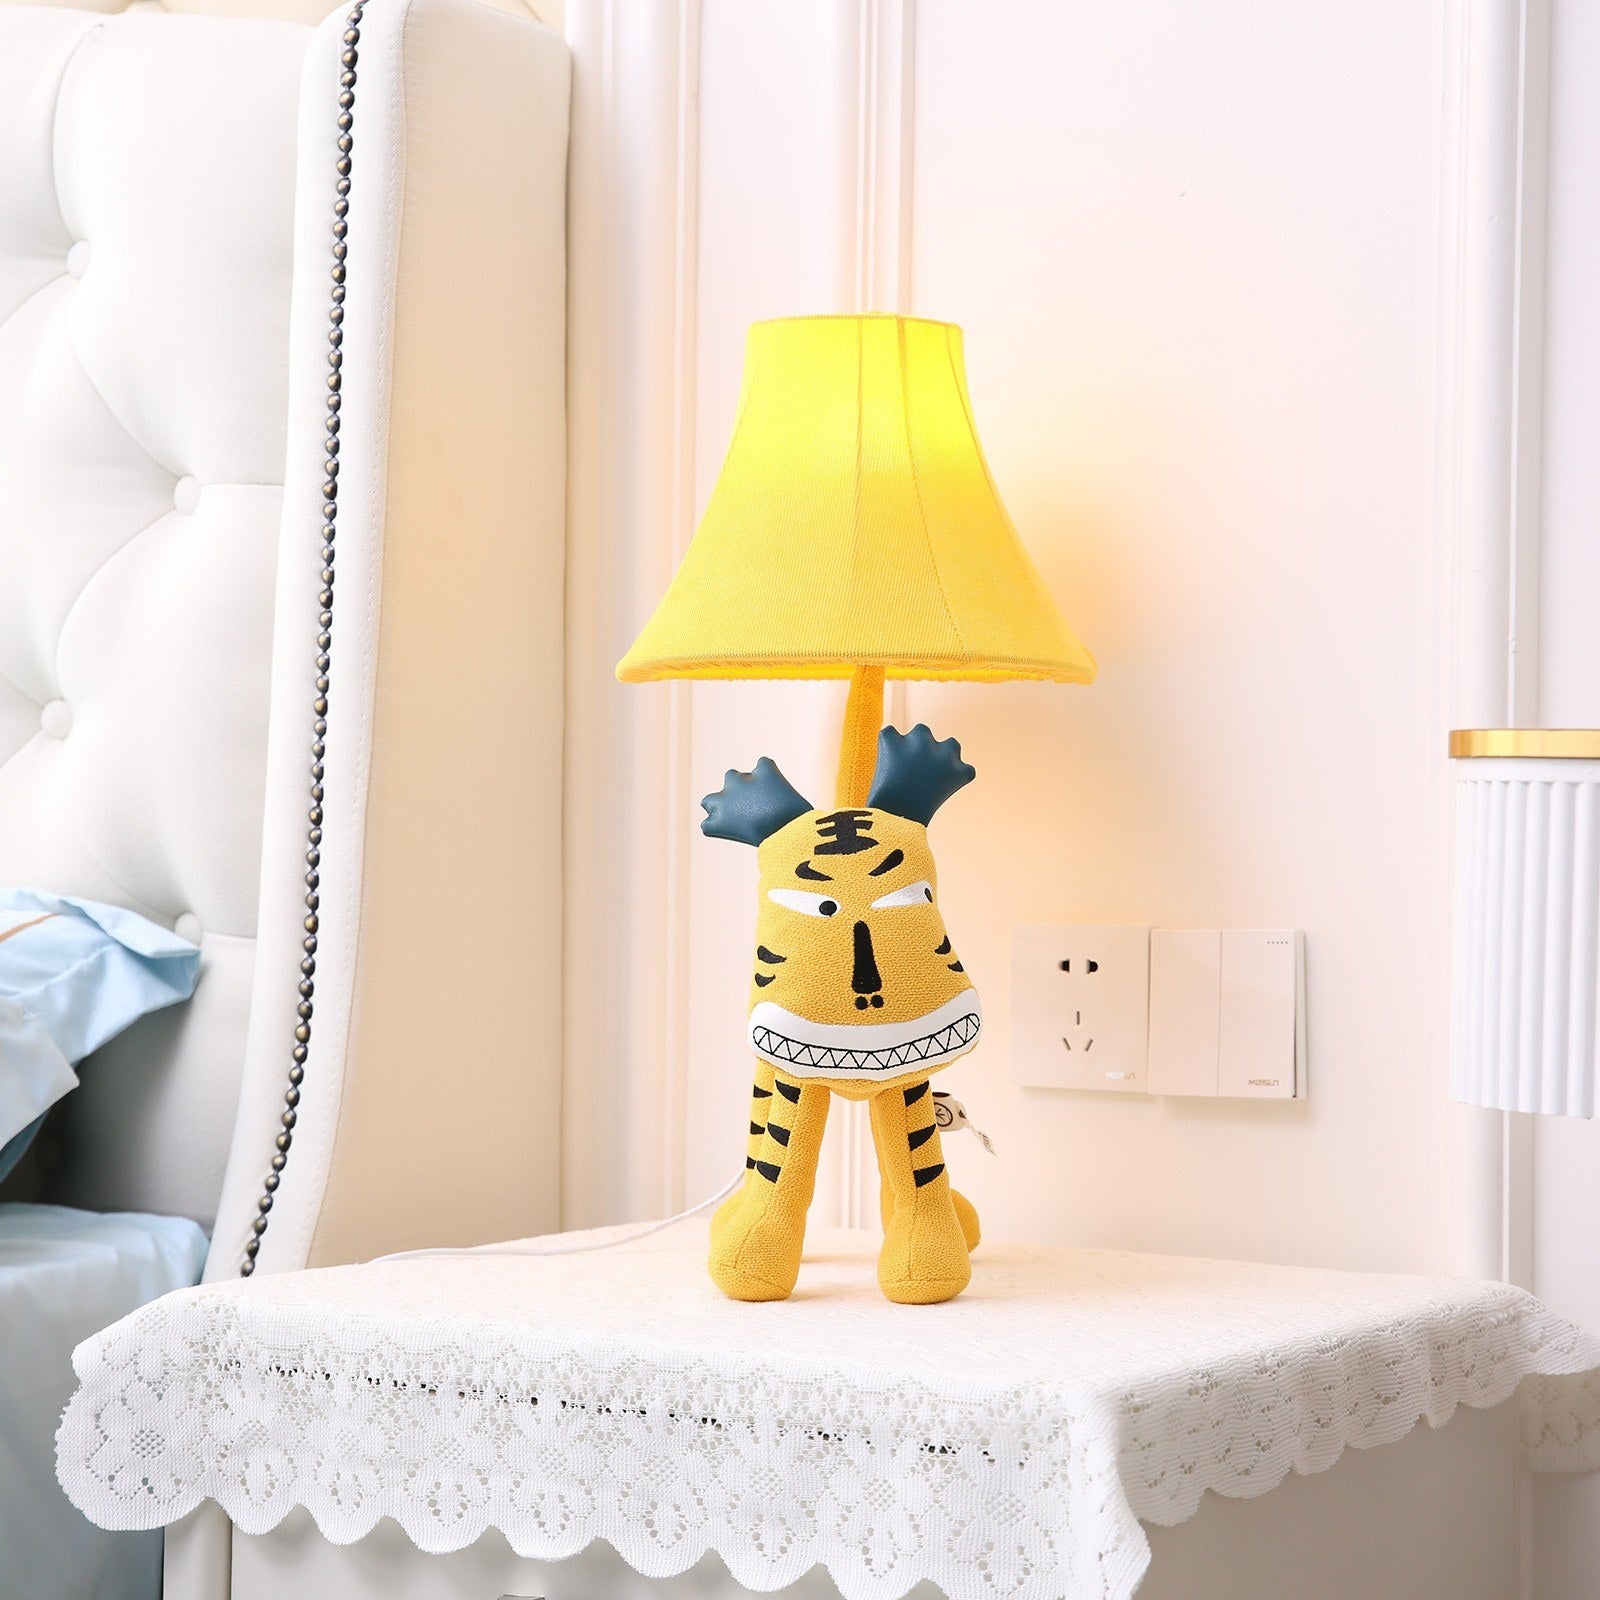 Make sure to turn this adorable, detachable tiger lamp on at night for a soft-lit ambience that will light up the night